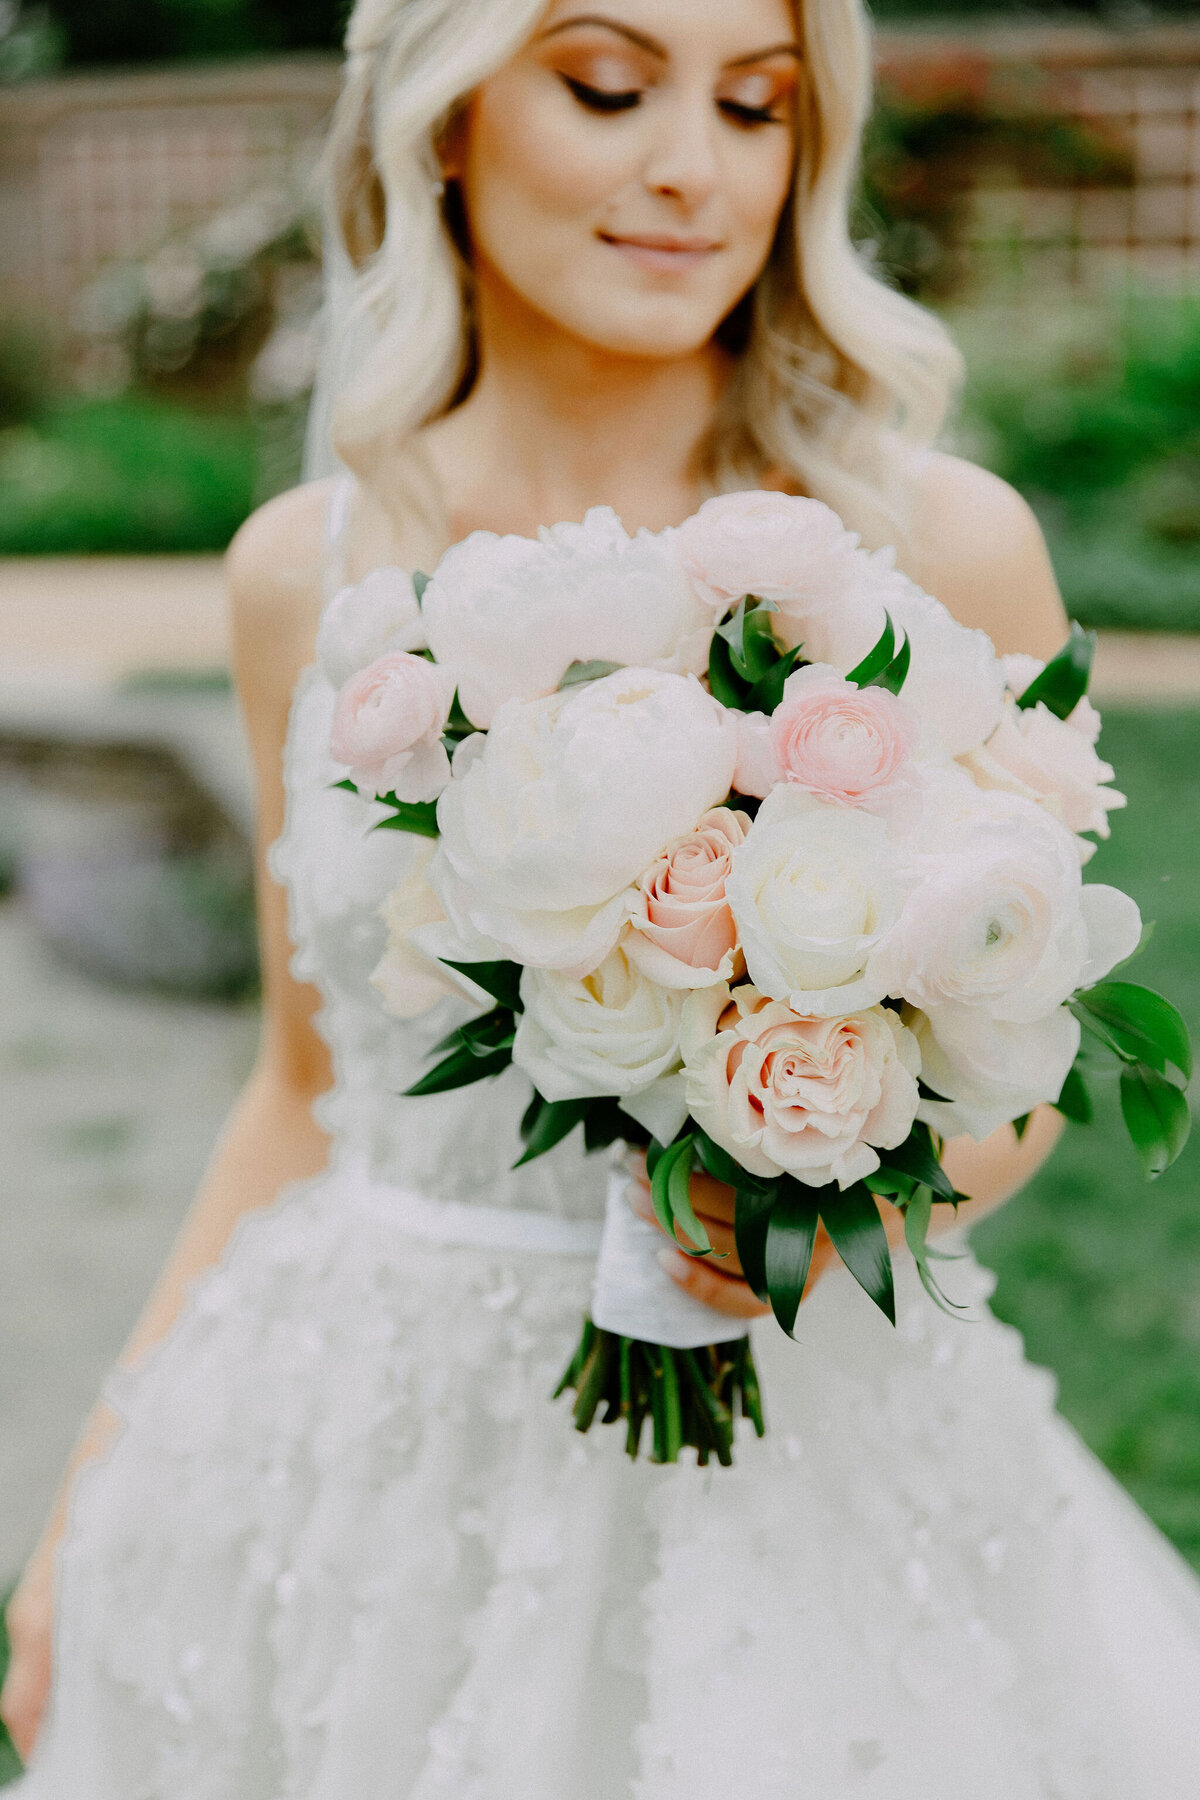 A close-up image of the bride holding her flower bouquet,  focusing on the bouquet's intricate details and the bride's expression